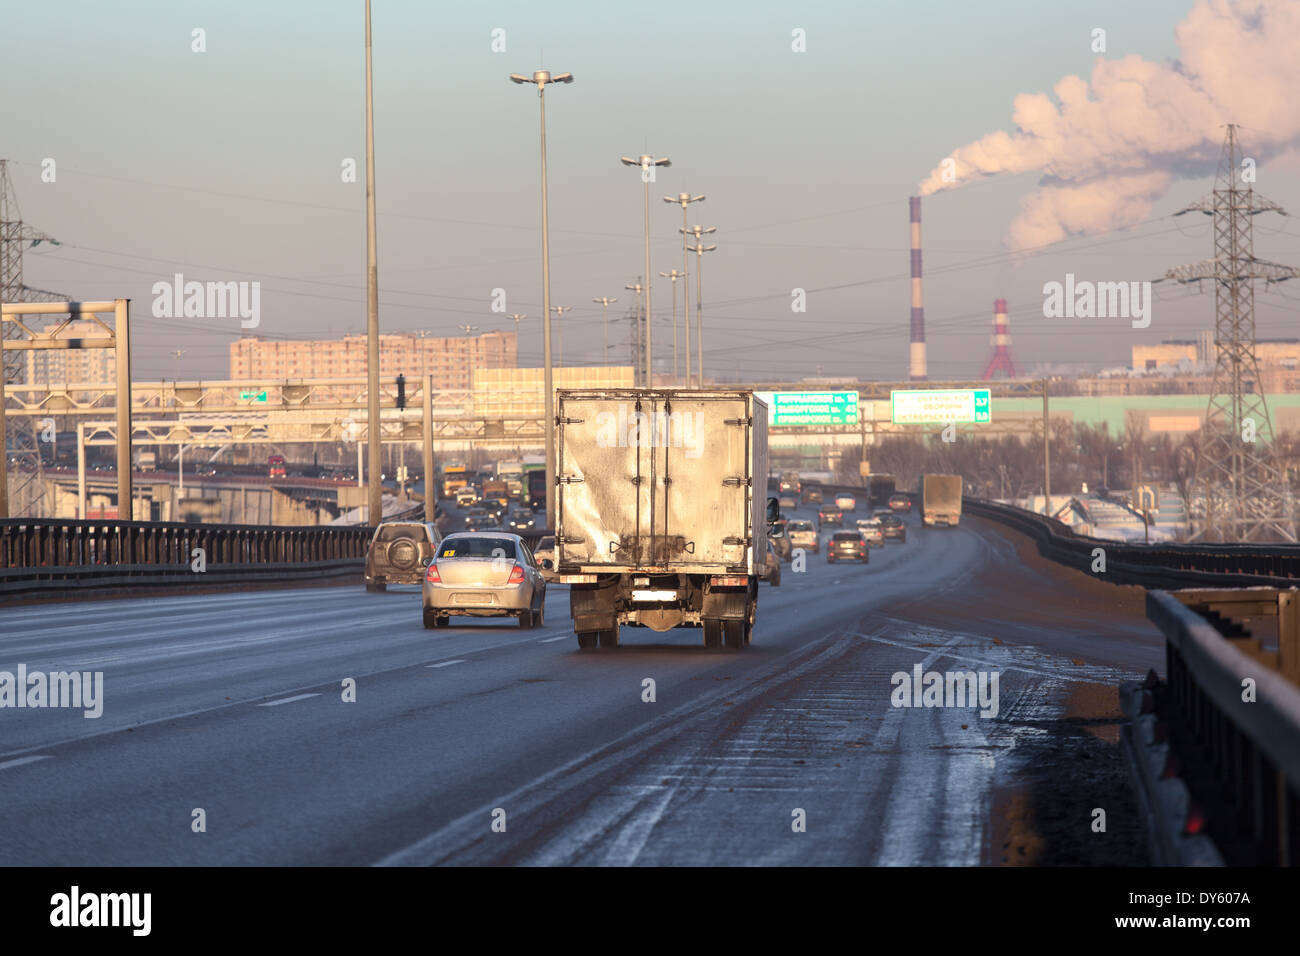 Vehicles riding on the dirty city highway at winter Stock Photo